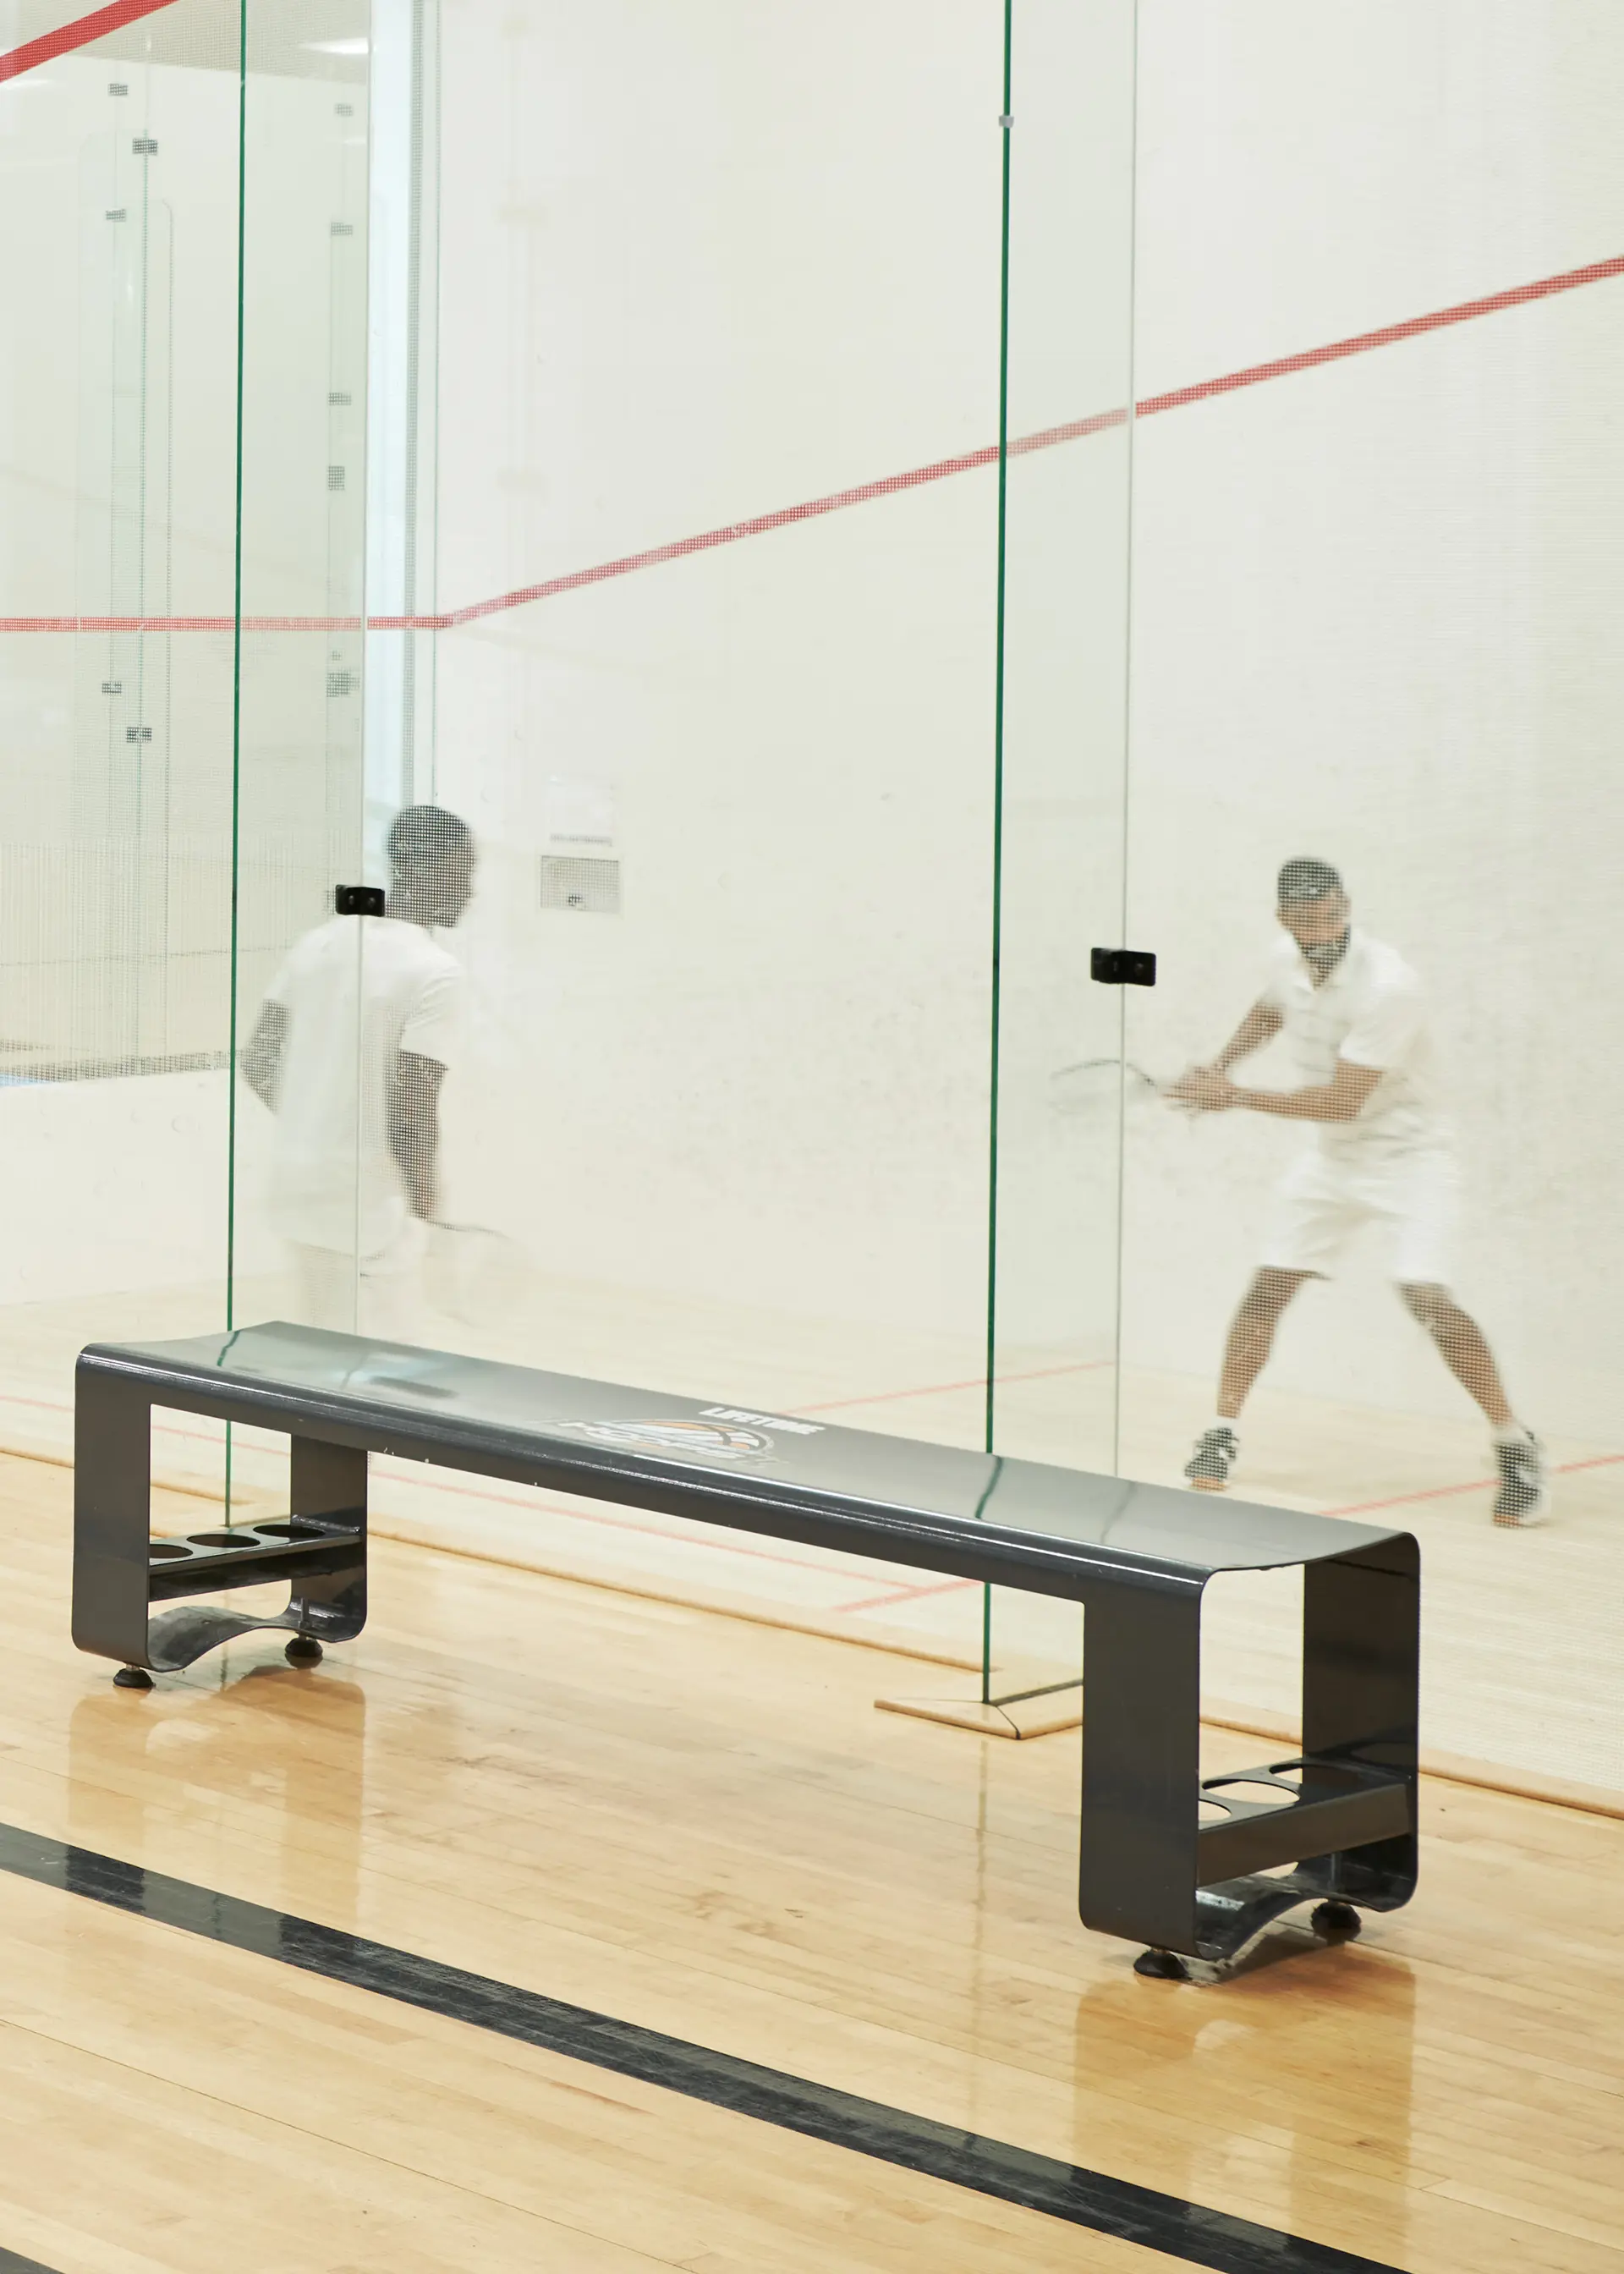 Two people holding racquets and playing squash on an indoor court.